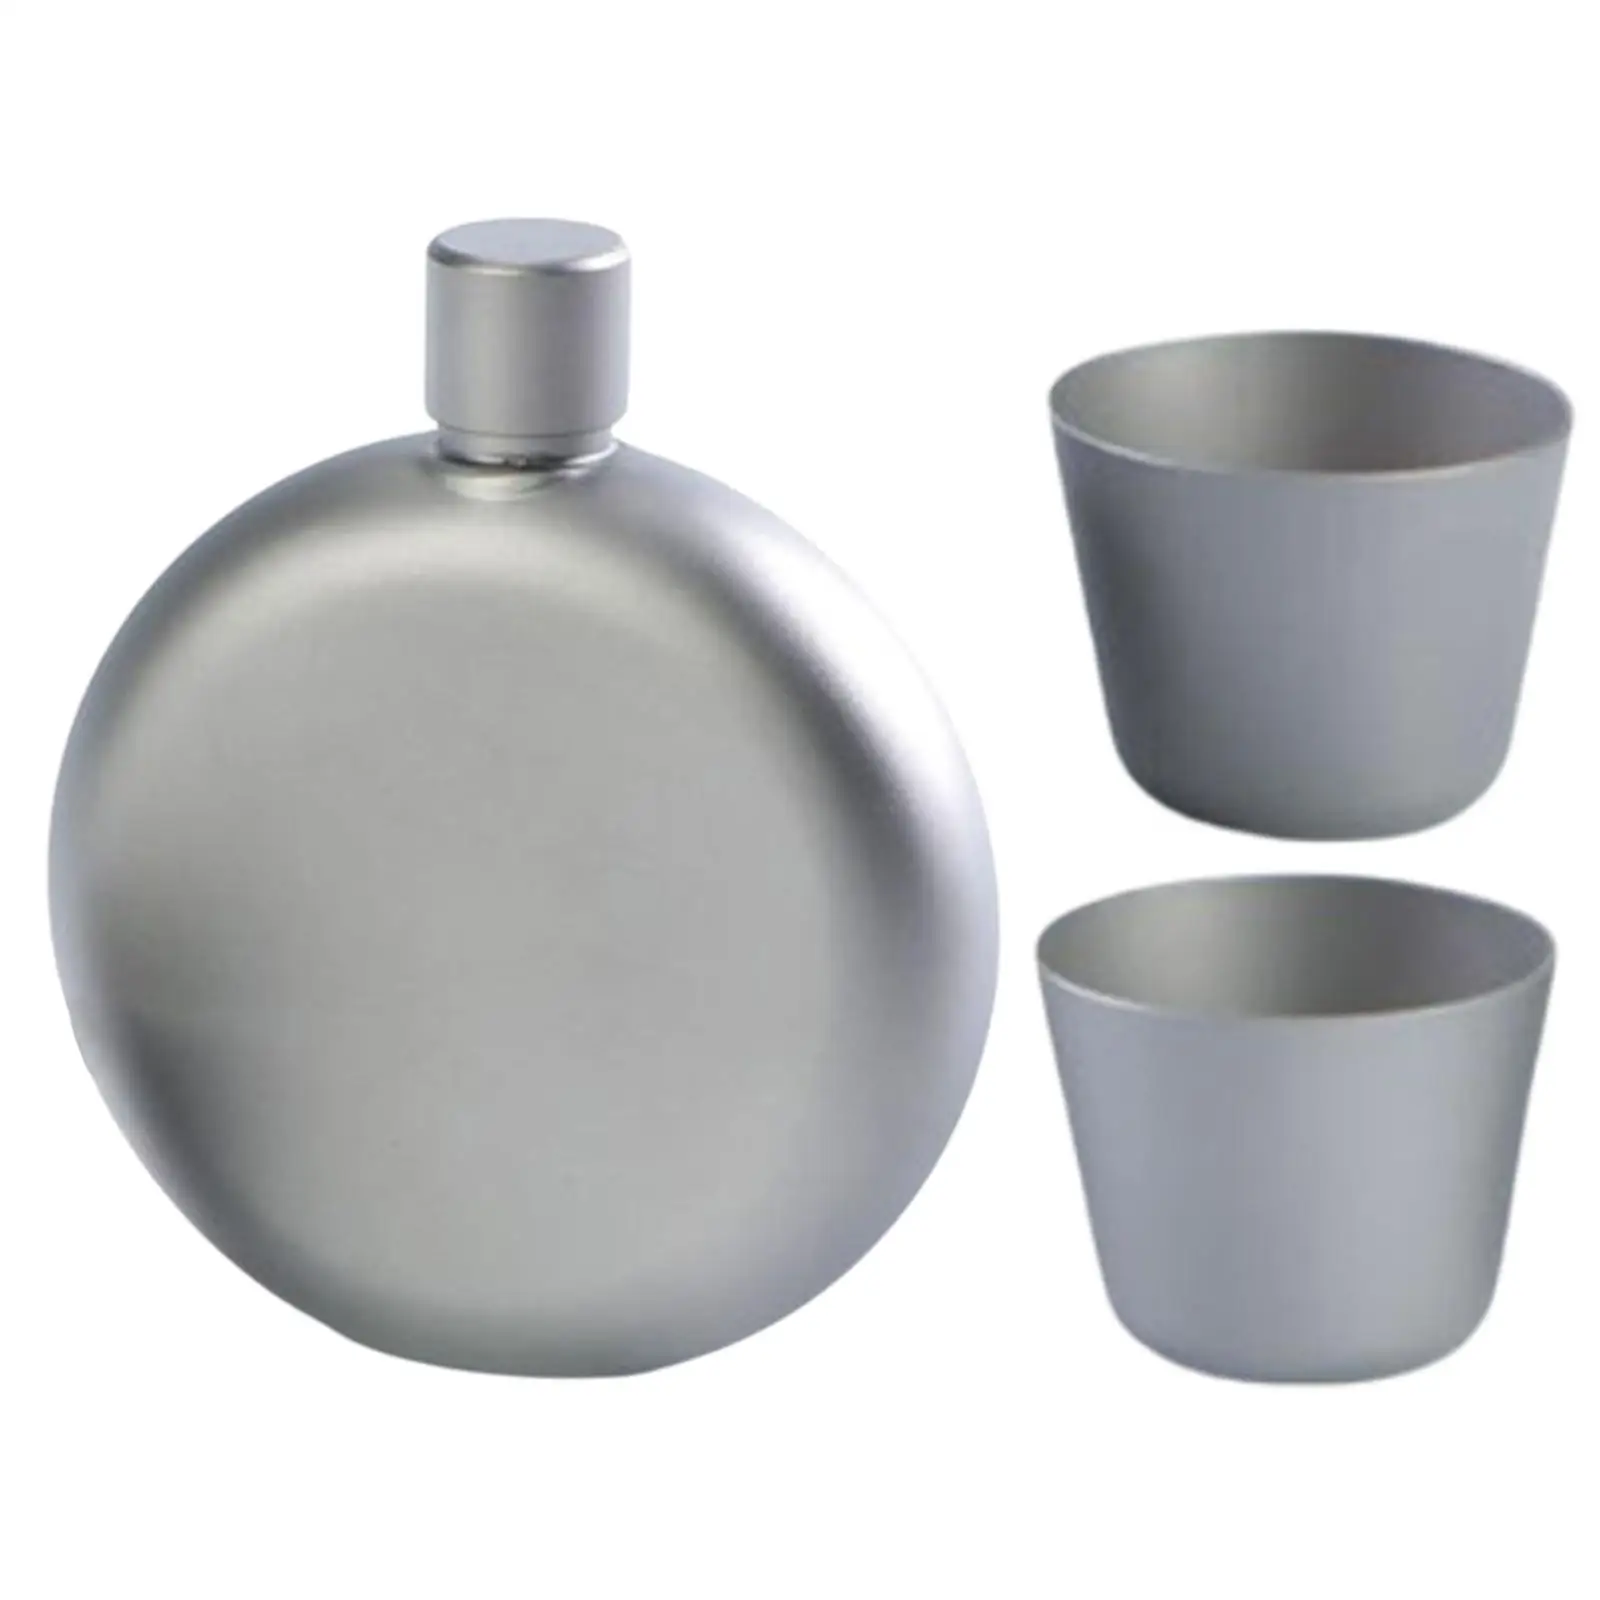 150ml Leakproof Titanium Flask Alcohol Whisky Wine Flask with Cups for Outdoor Camping Backpacking Travel Picnic